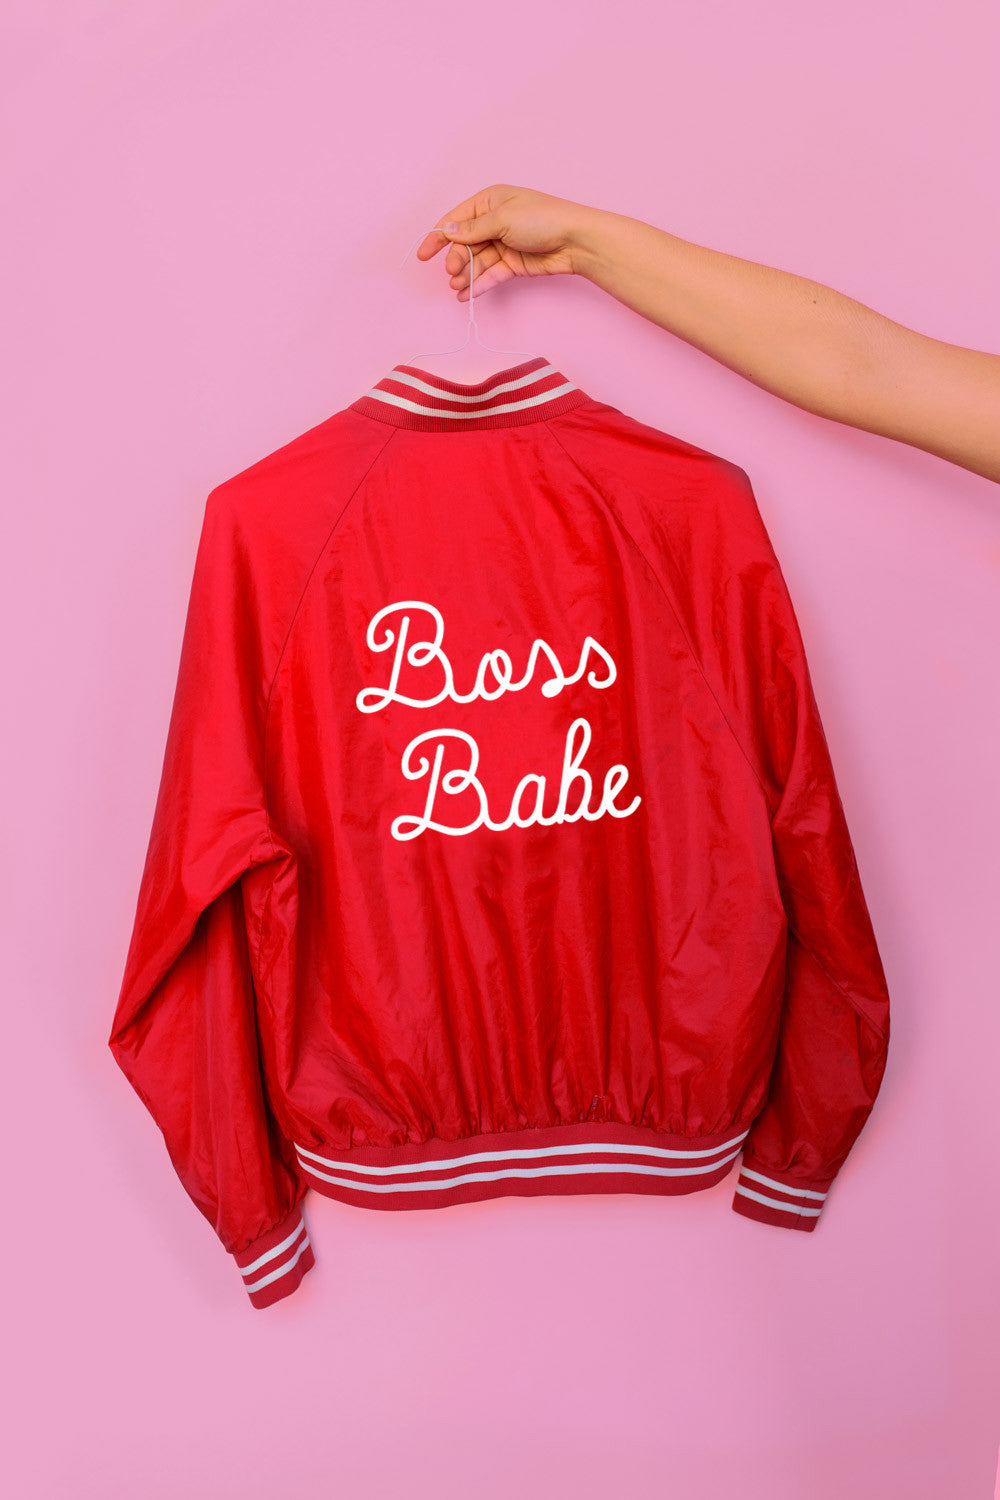 Boss Babe Jacket by TasteTheStyle – The 